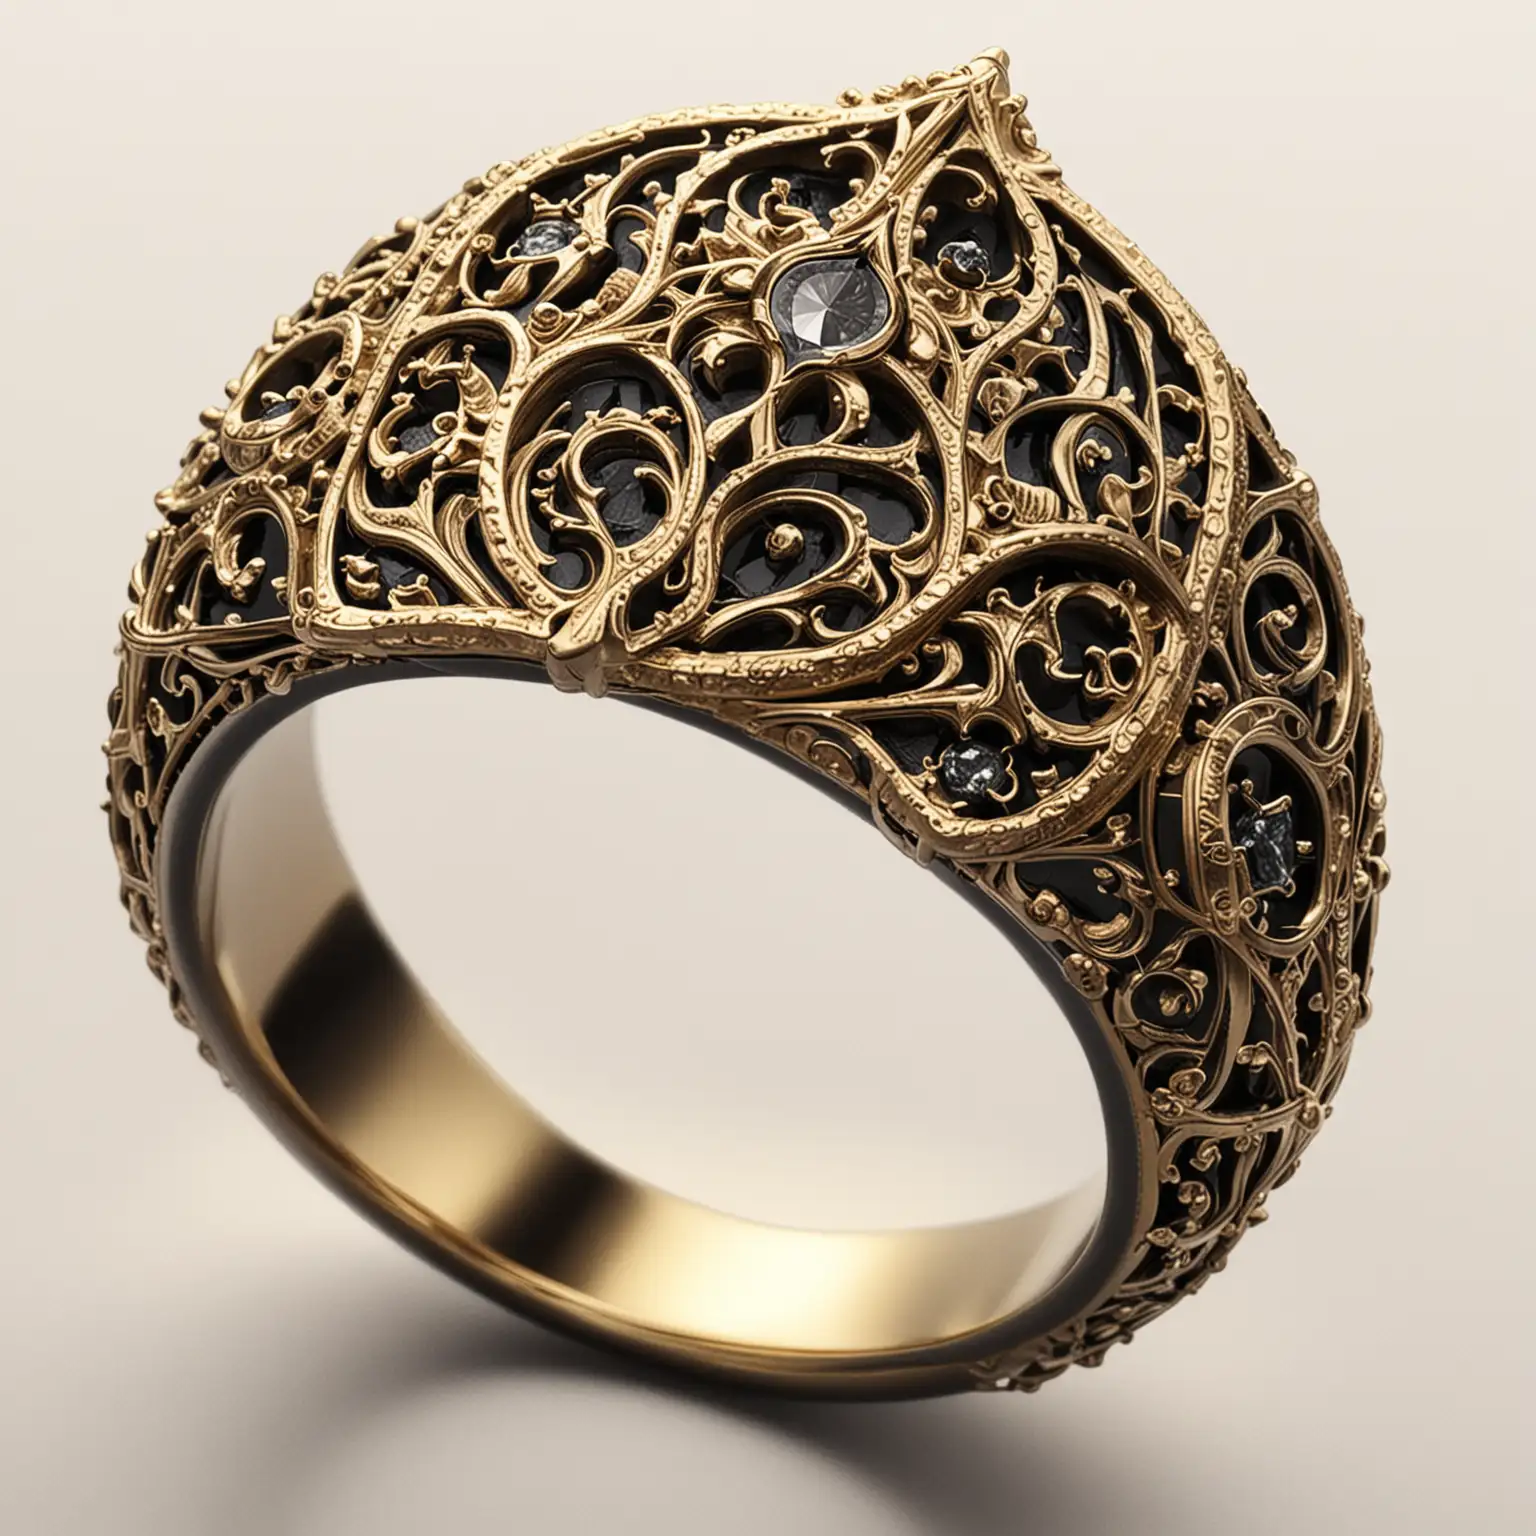 Hand drawing of a gold ring inspired by dark gothic cathedrals
